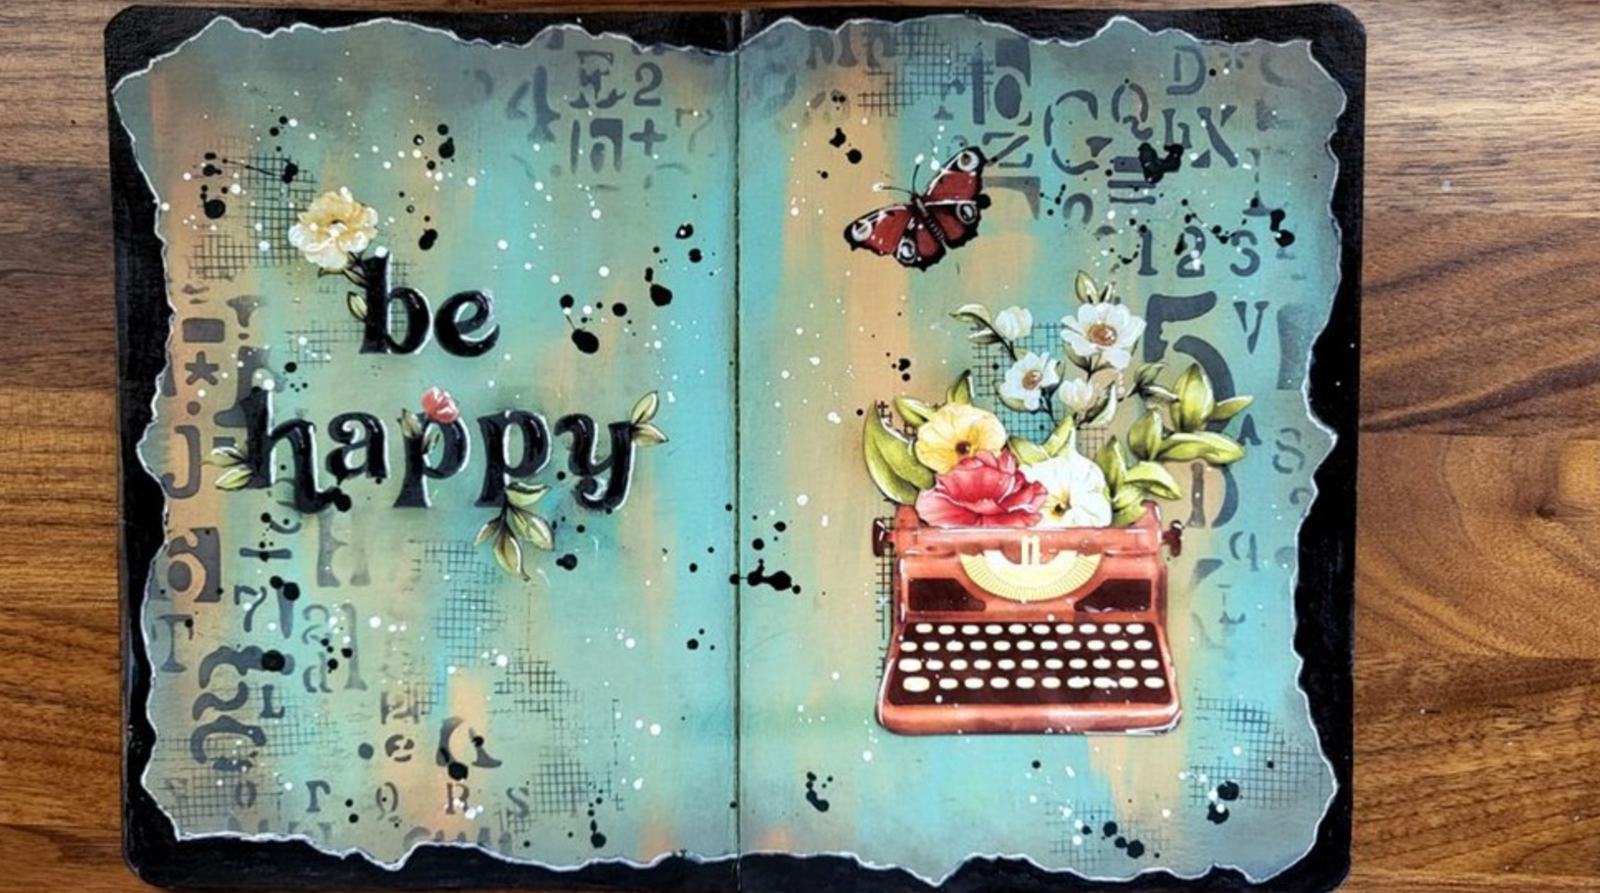 Create Happiness - Acrylic Stamp - Alphabets and Numbers - Vicky Papaioannou - Stamperia